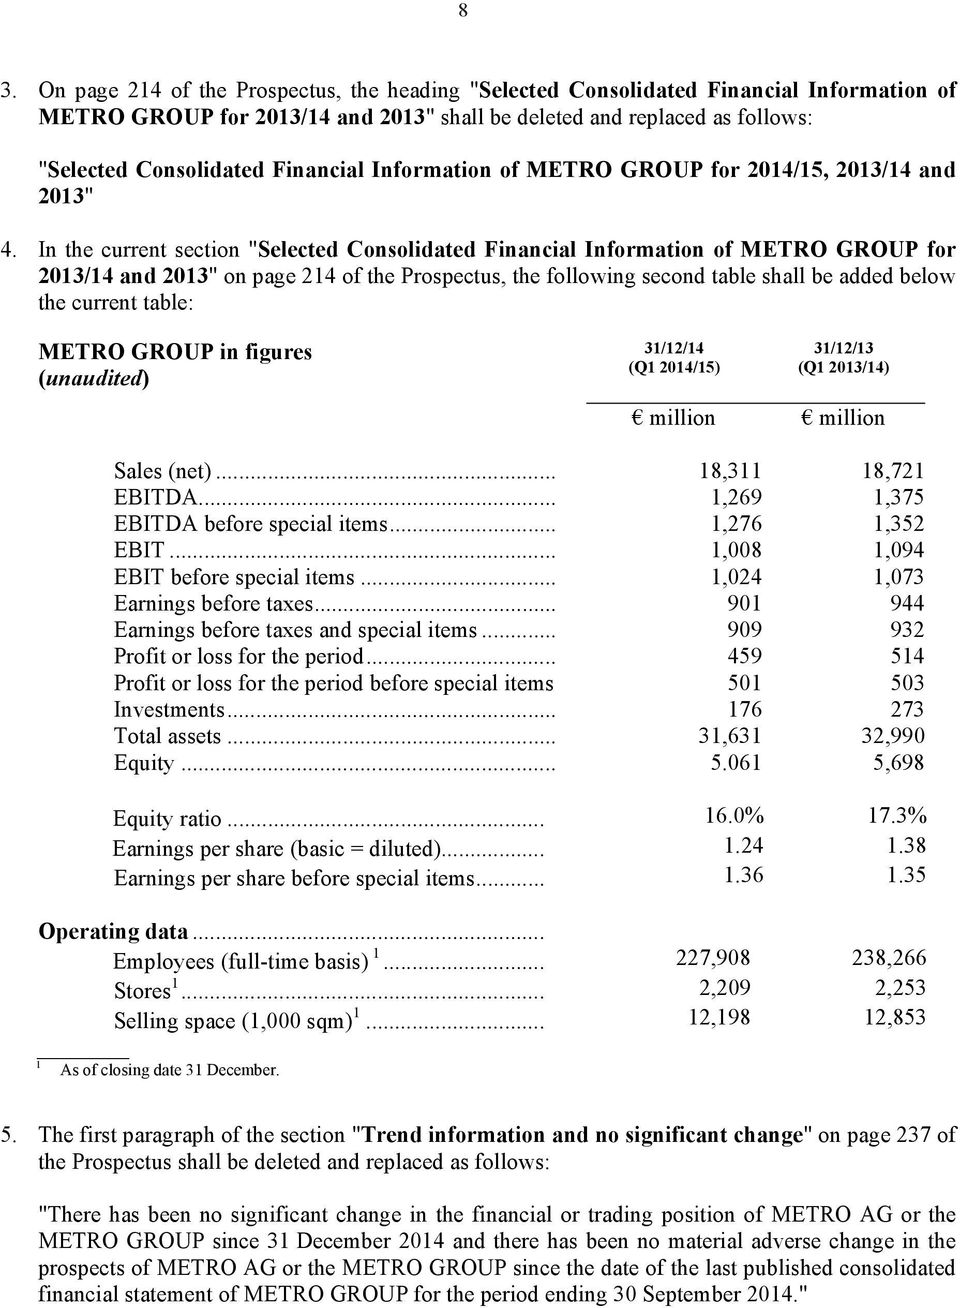 In the current section "Selected Consolidated Financial Information of METRO GROUP for 2013/14 and 2013" on page 214 of the Prospectus, the following second table shall be added below the current